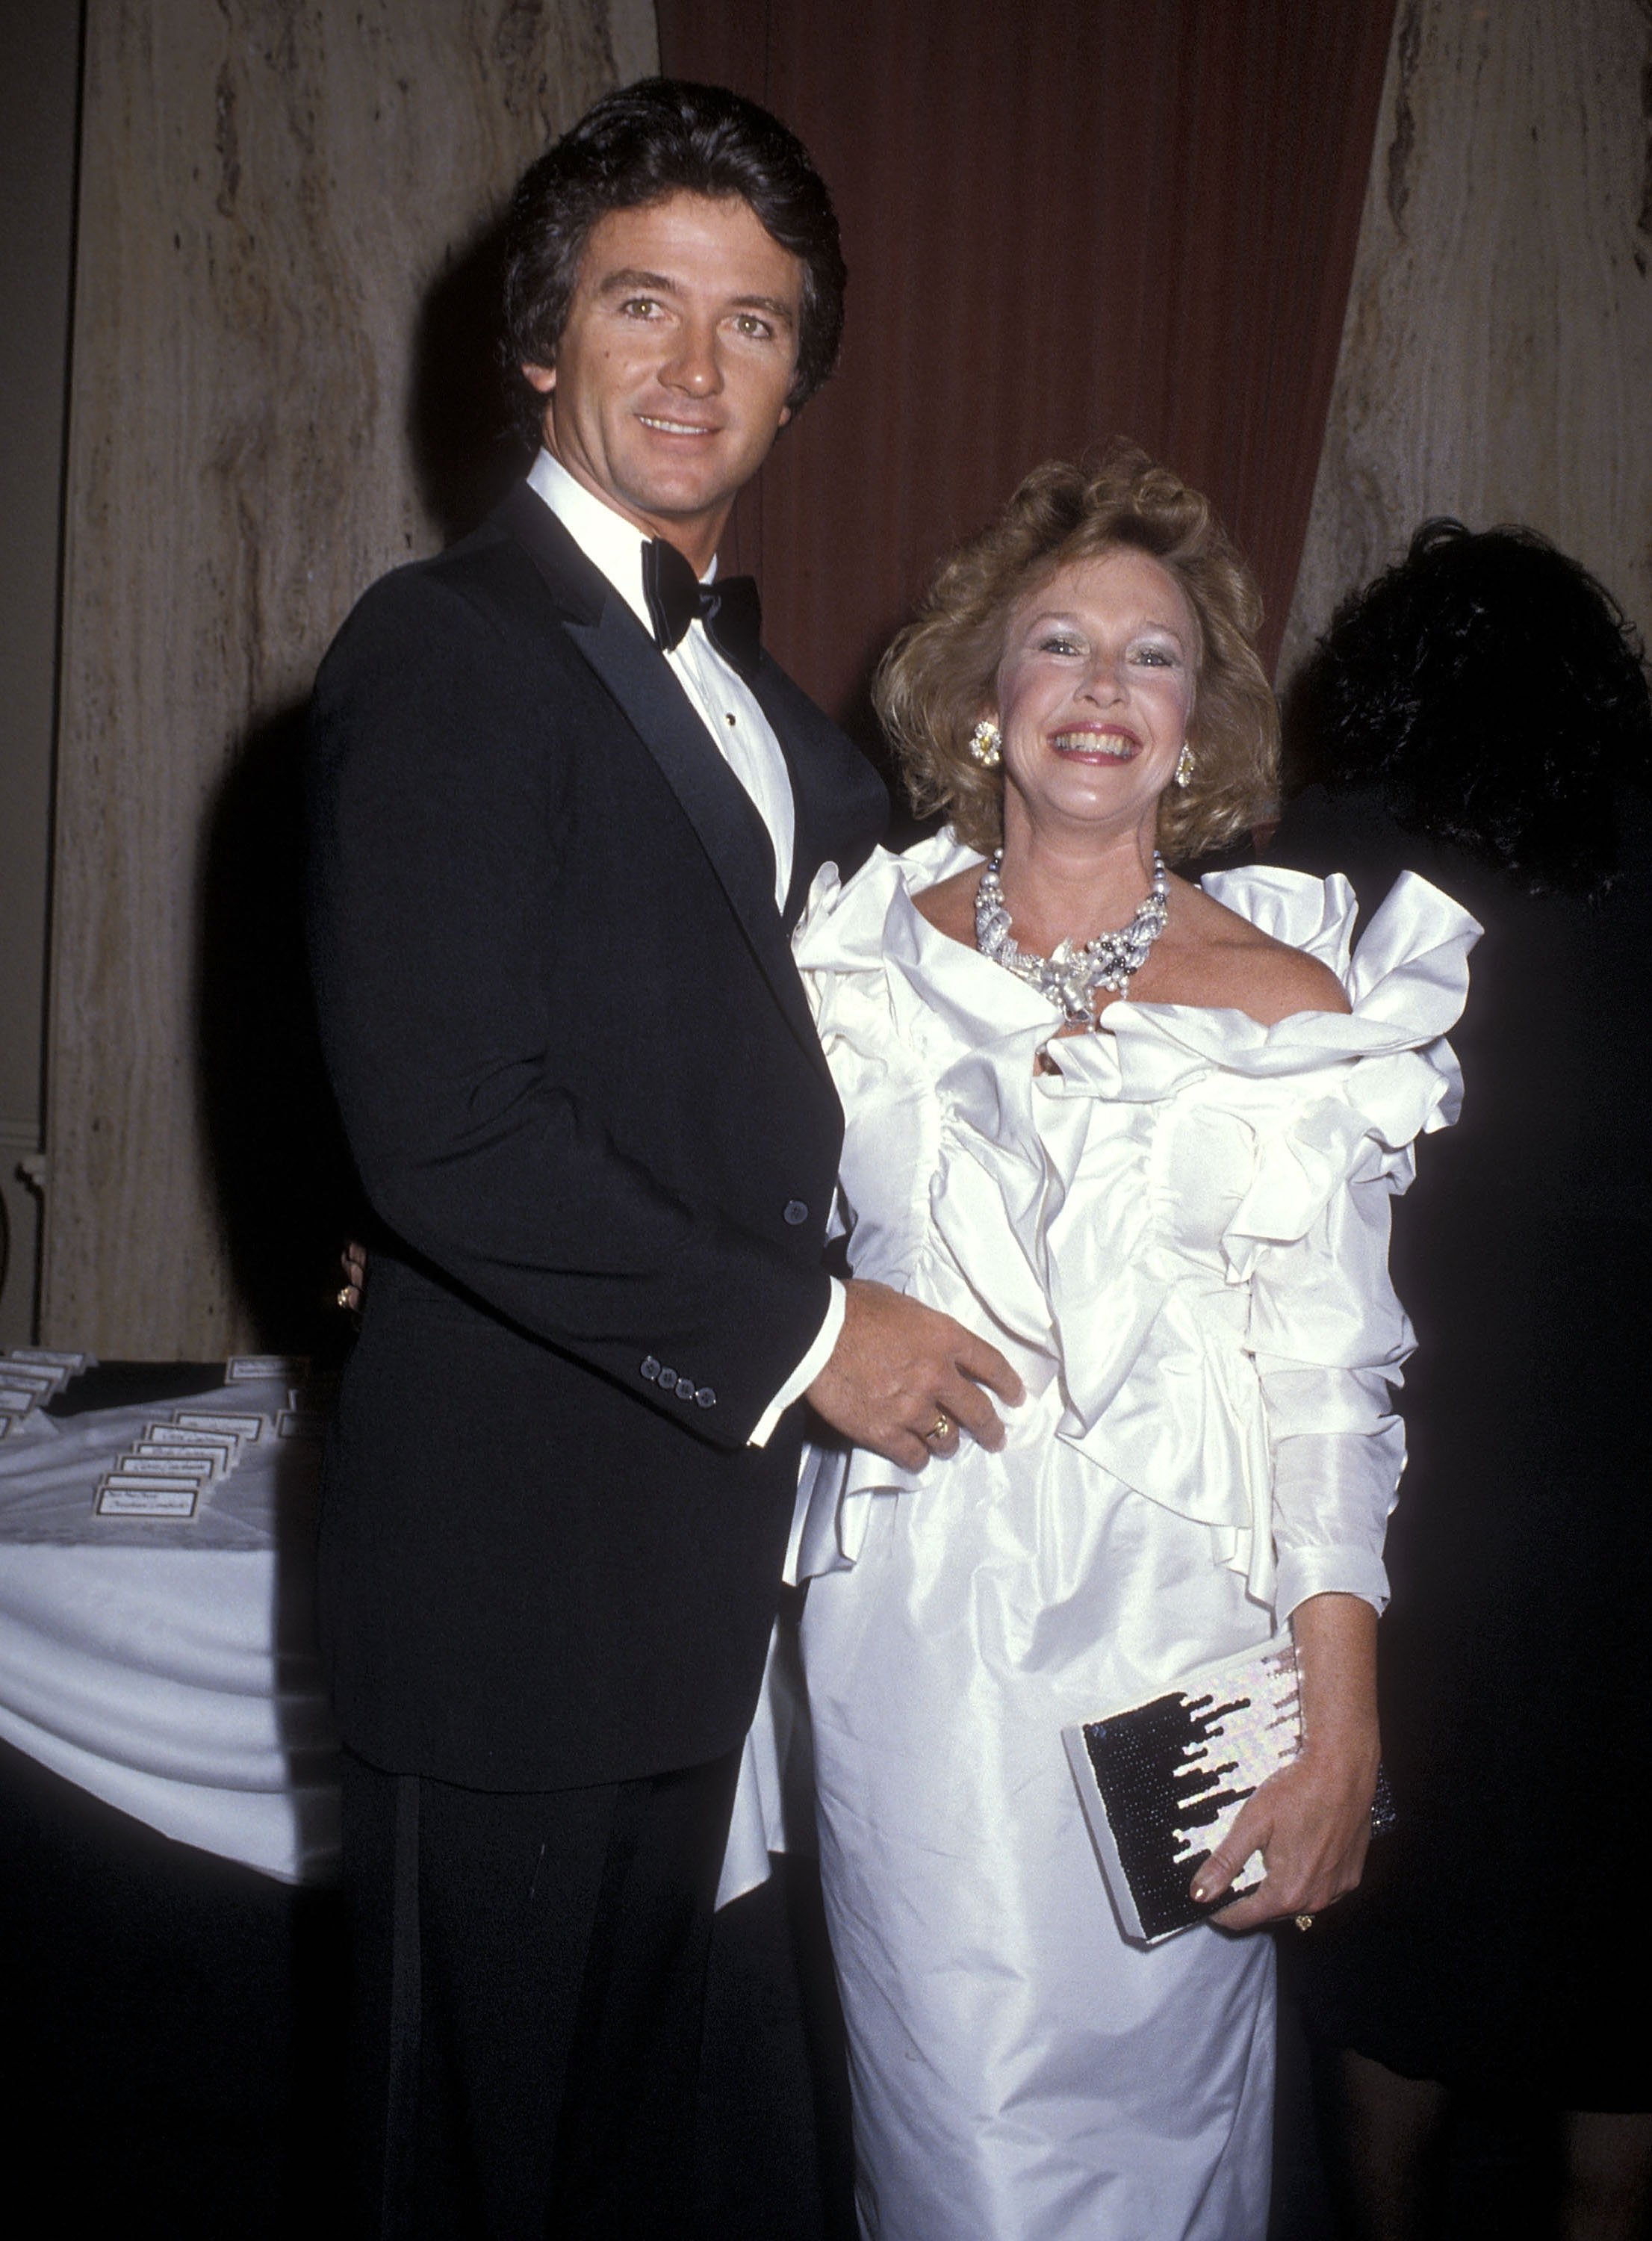 Patrick Duffy and wife Carlyn on March 31, 1985, at the Beverly Hilton Hotel in Beverly Hills, California. | Source: Getty Images